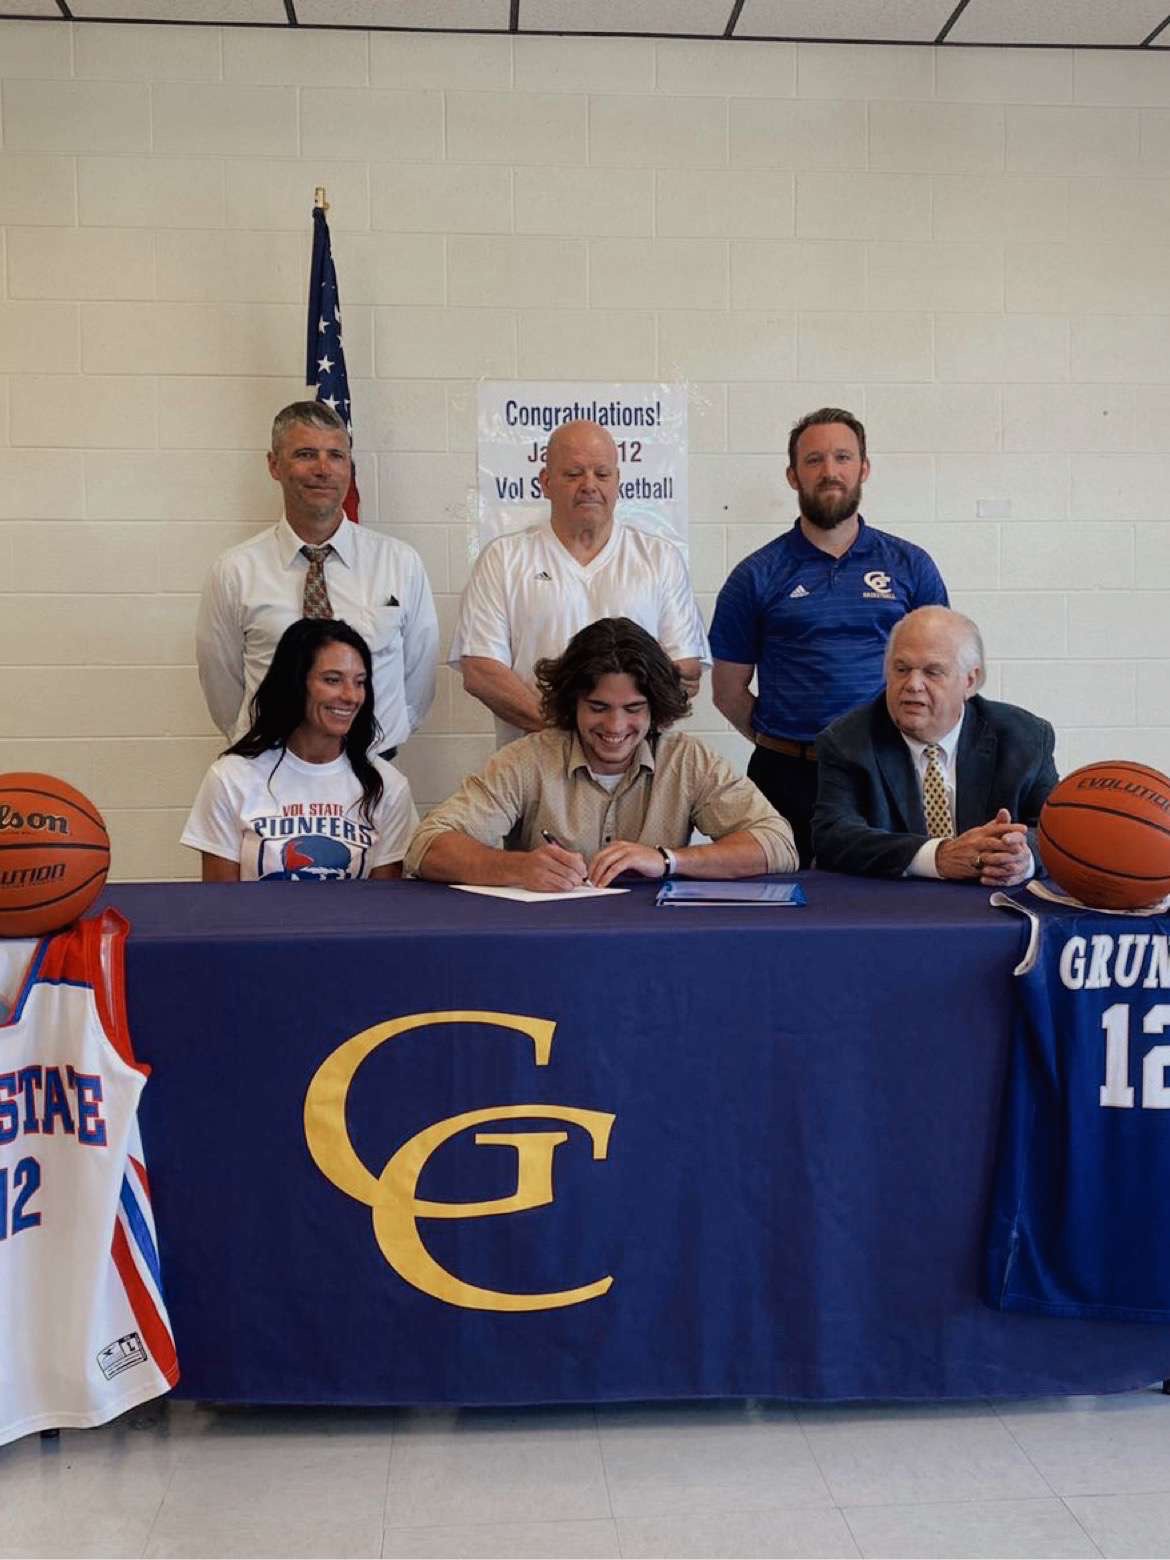 Grundy County's Ruehling Signs With Vol State Basketball